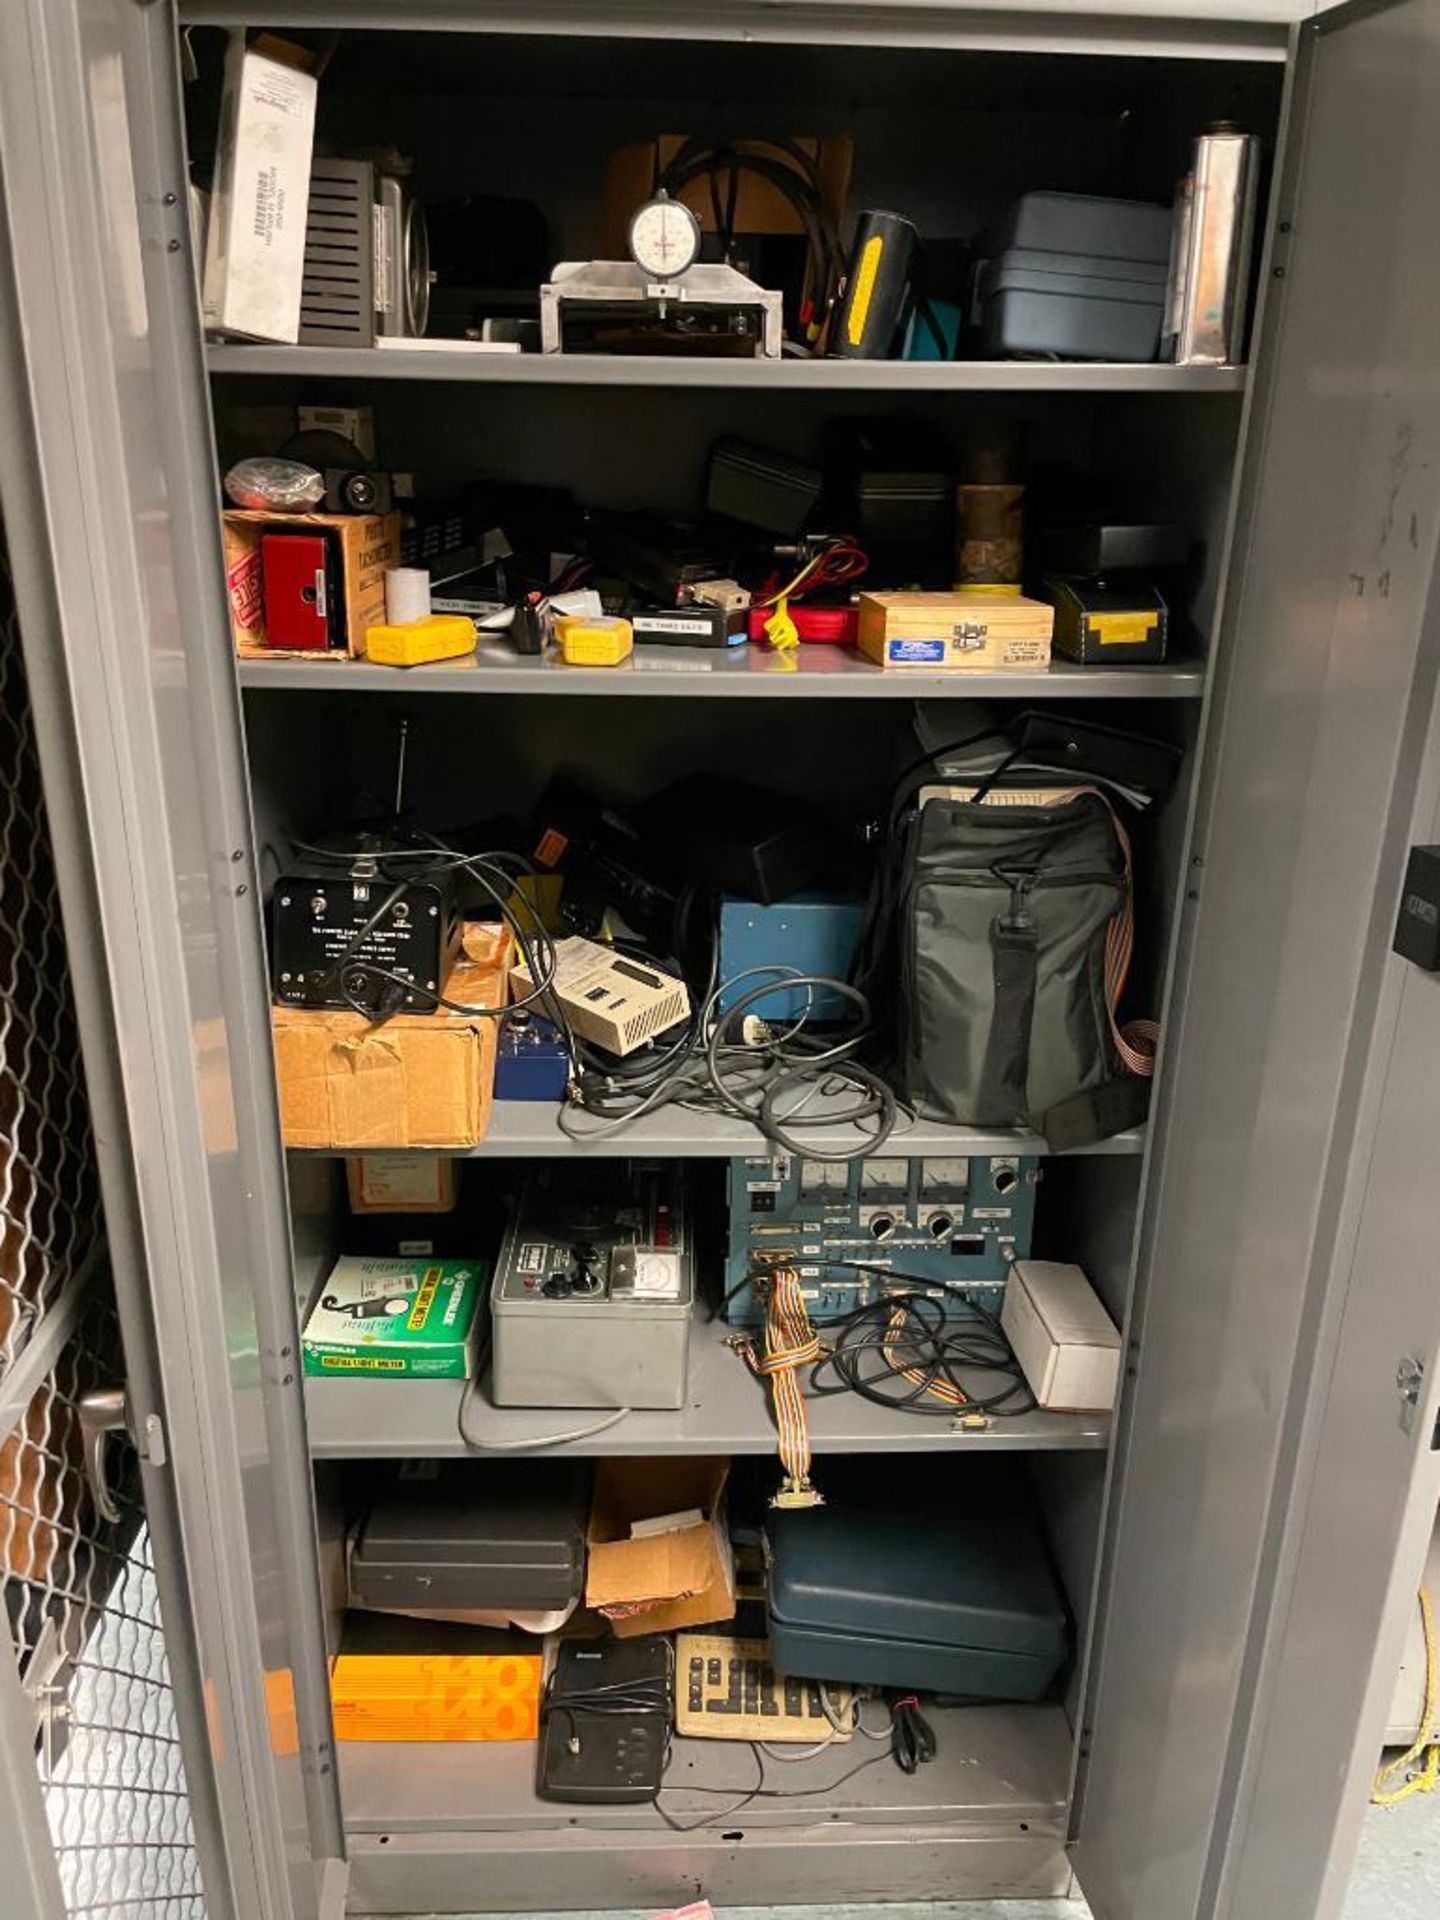 MECHANICS CAGE AND CONTENTS OF ASSORTED TOOLS